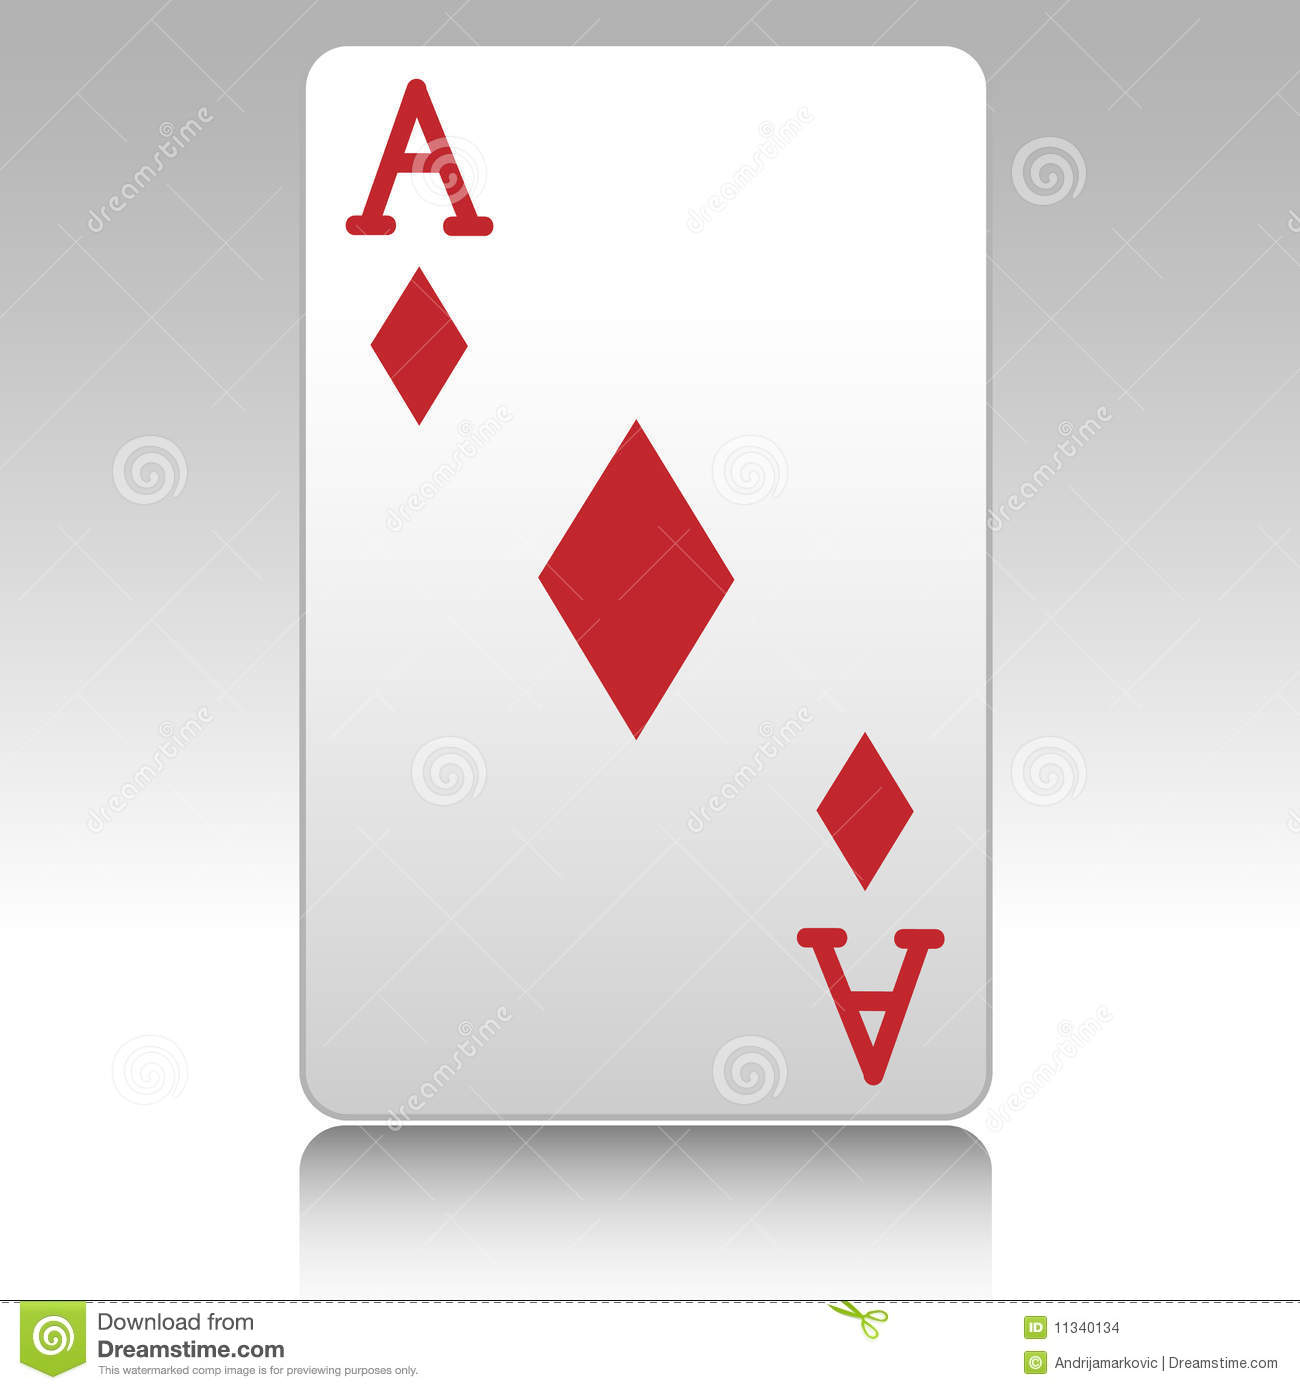 Ace Of Diamonds Stock Images   Image  11340134